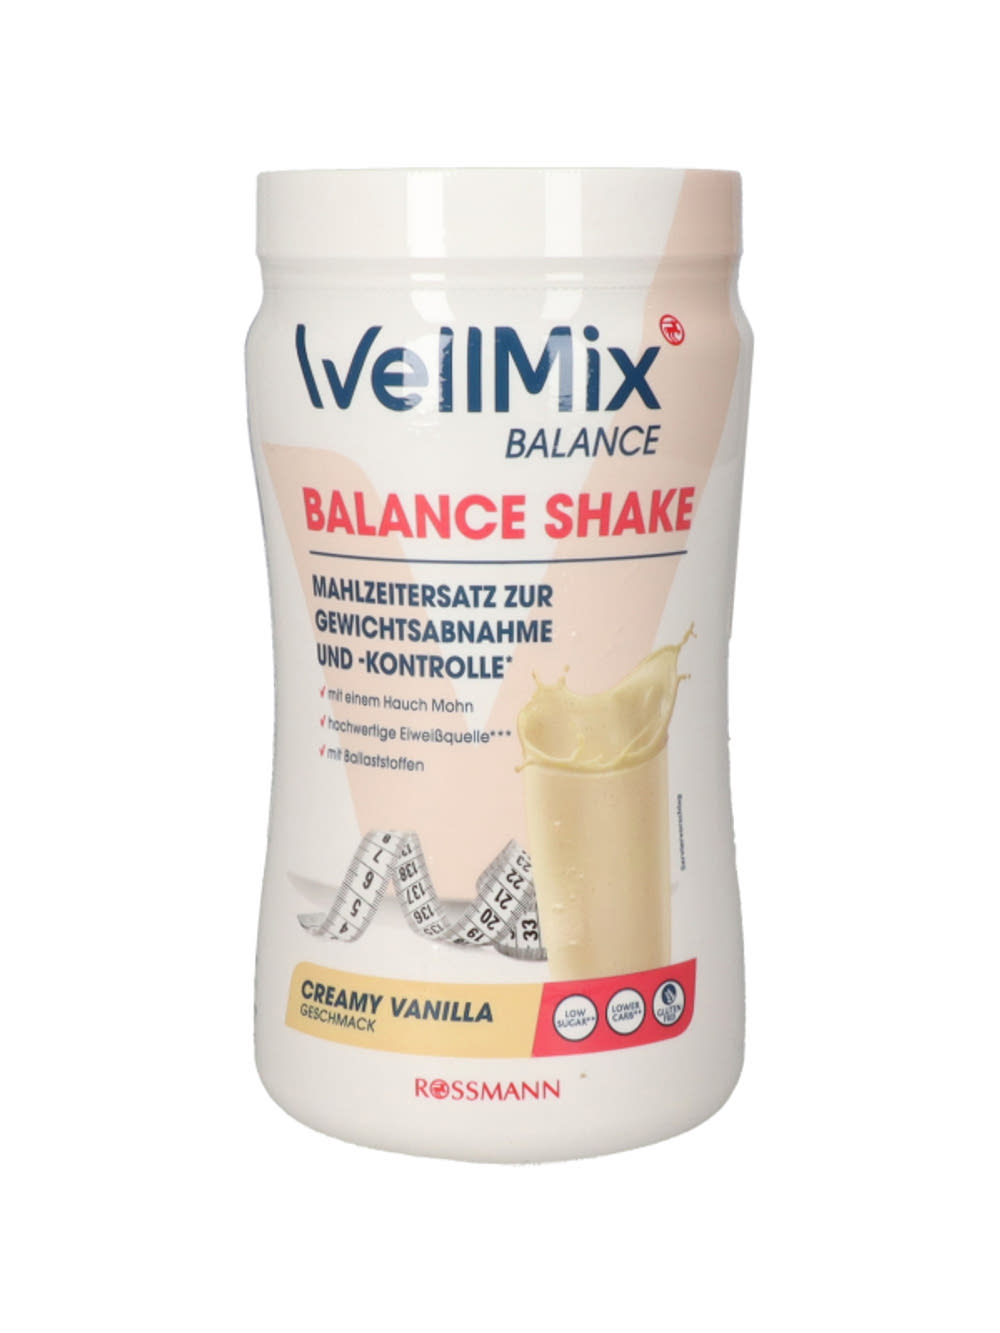 Ord At håndtere accelerator Well Mix Balance Vanille Shake - 350 g